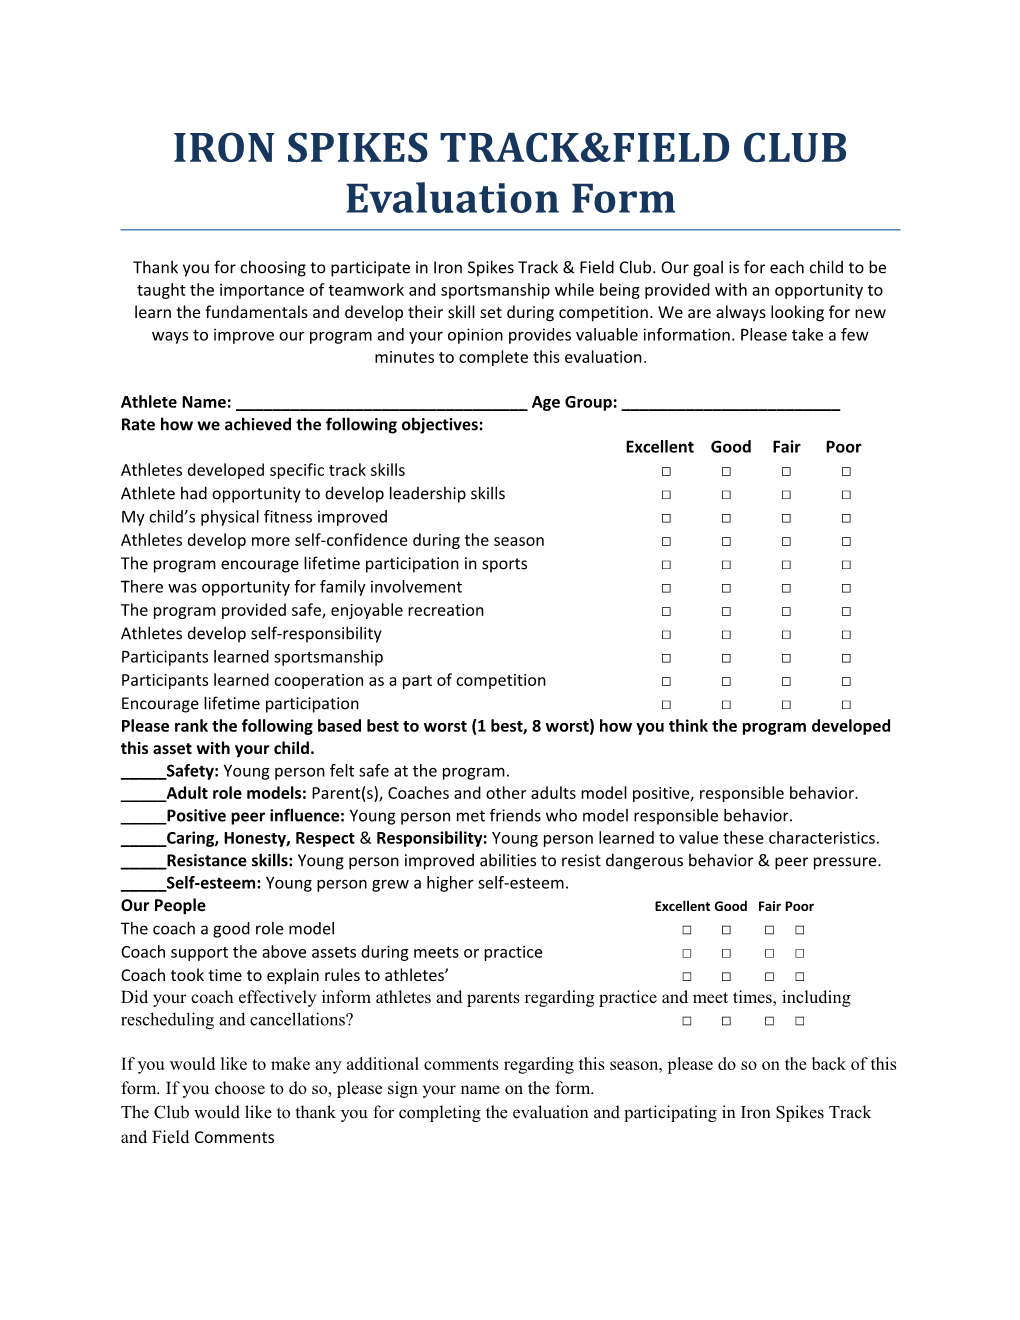 IRON SPIKES TRACK&FIELD CLUB Evaluation Form